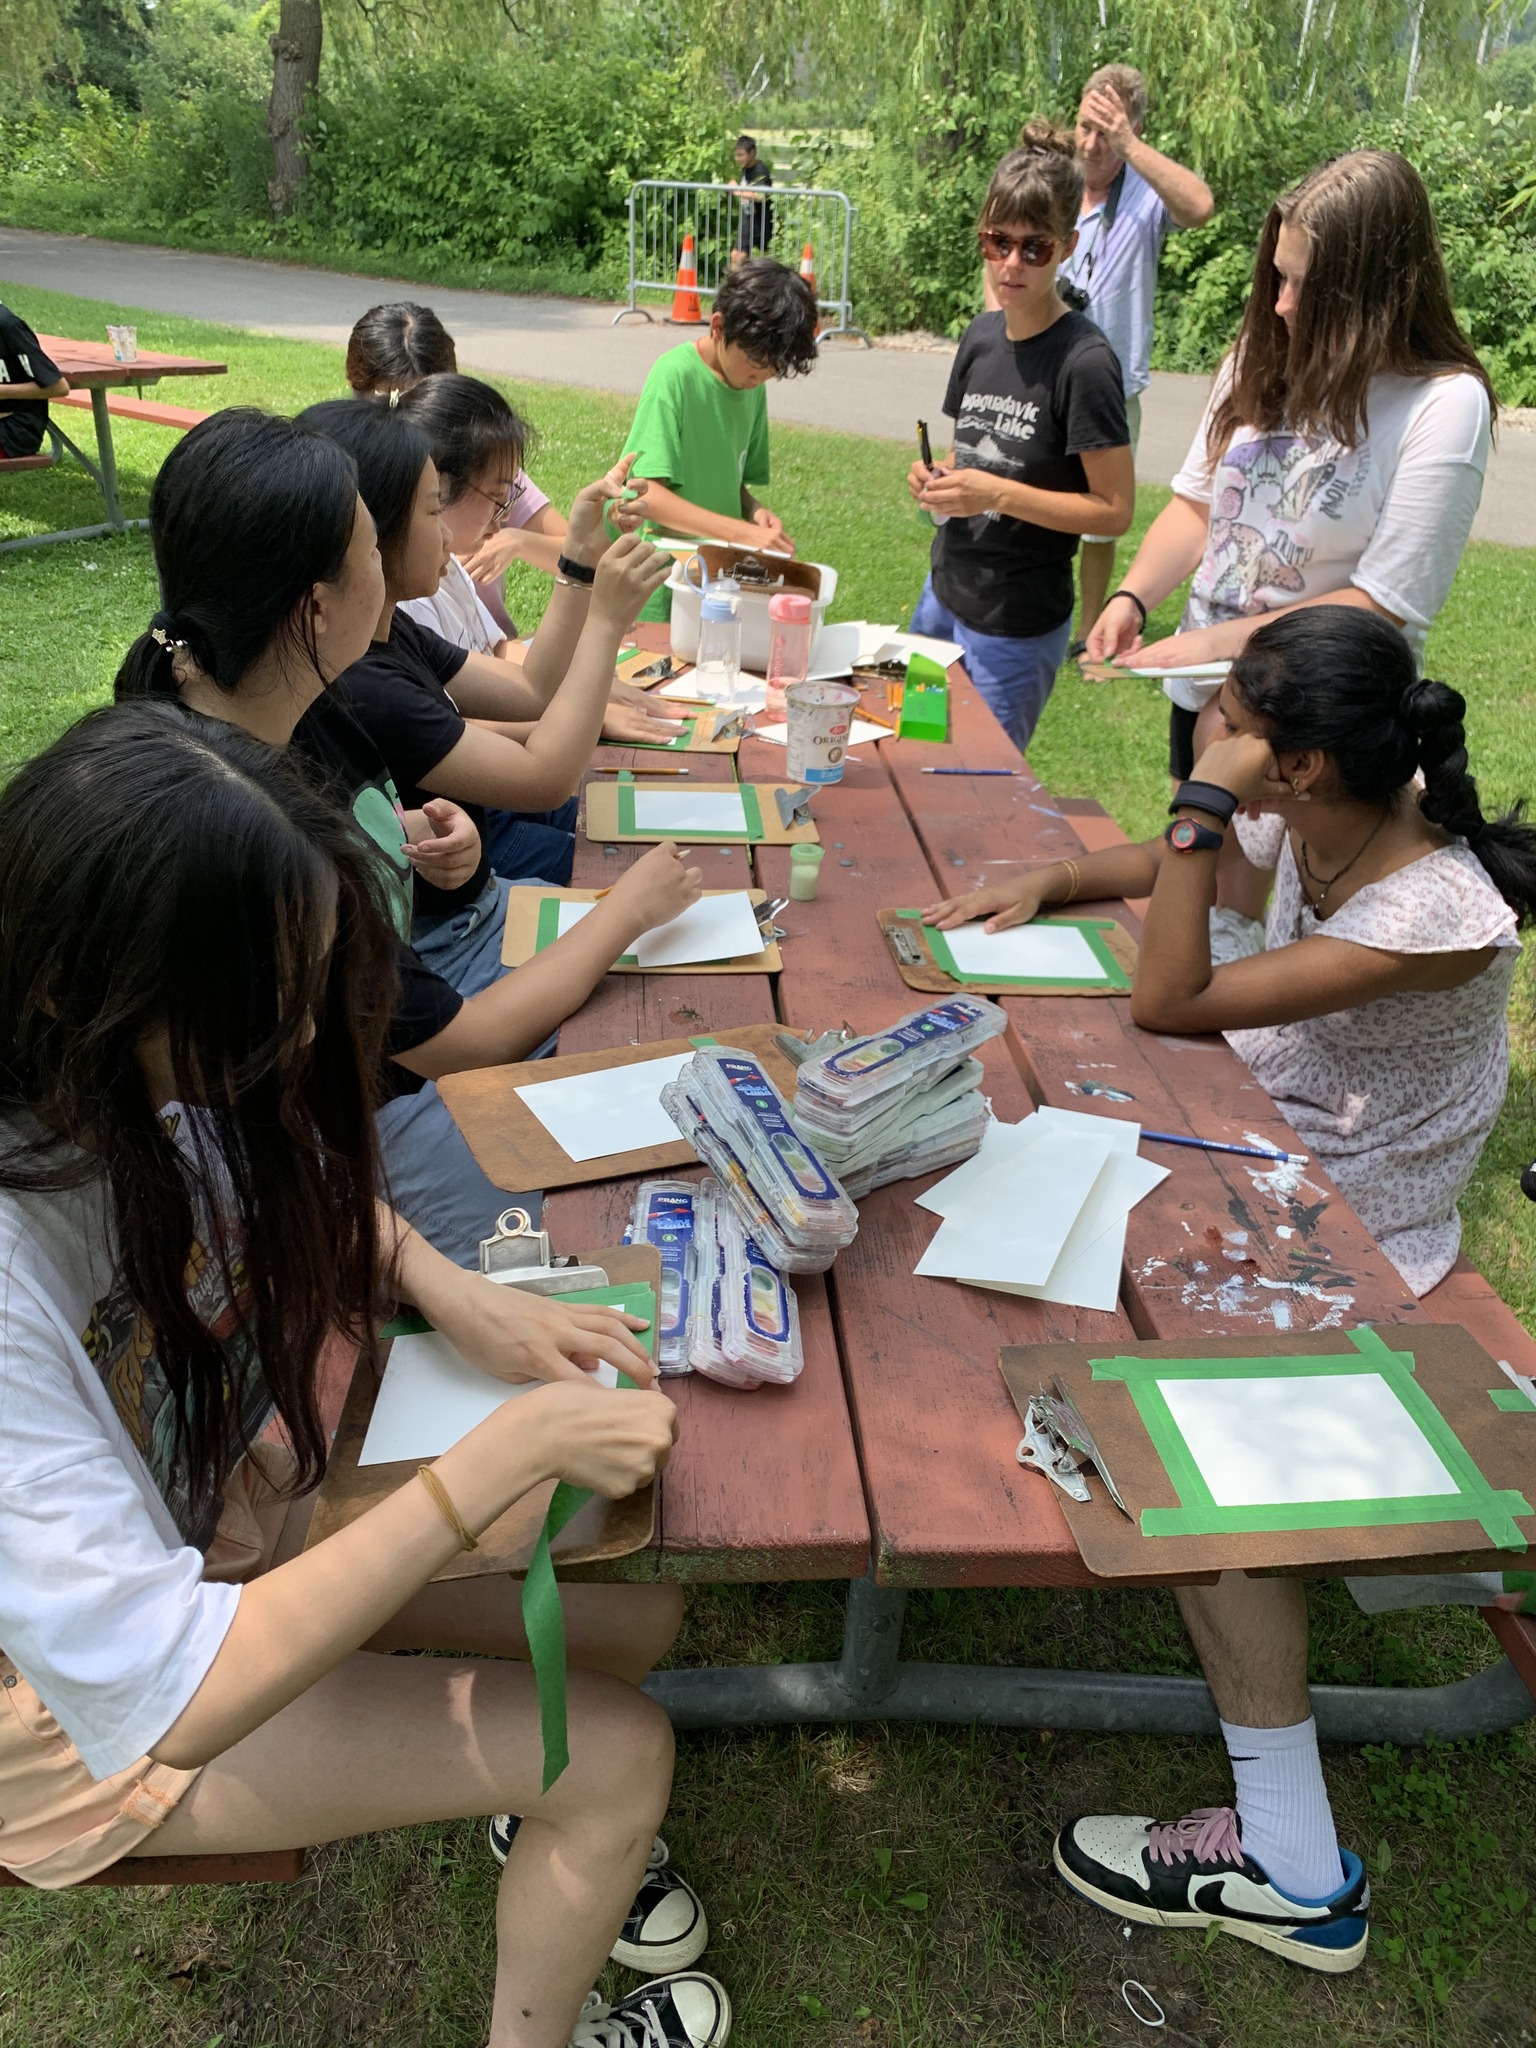 Students sitting at picnic table outside doing crafts and art projects Open Gallery